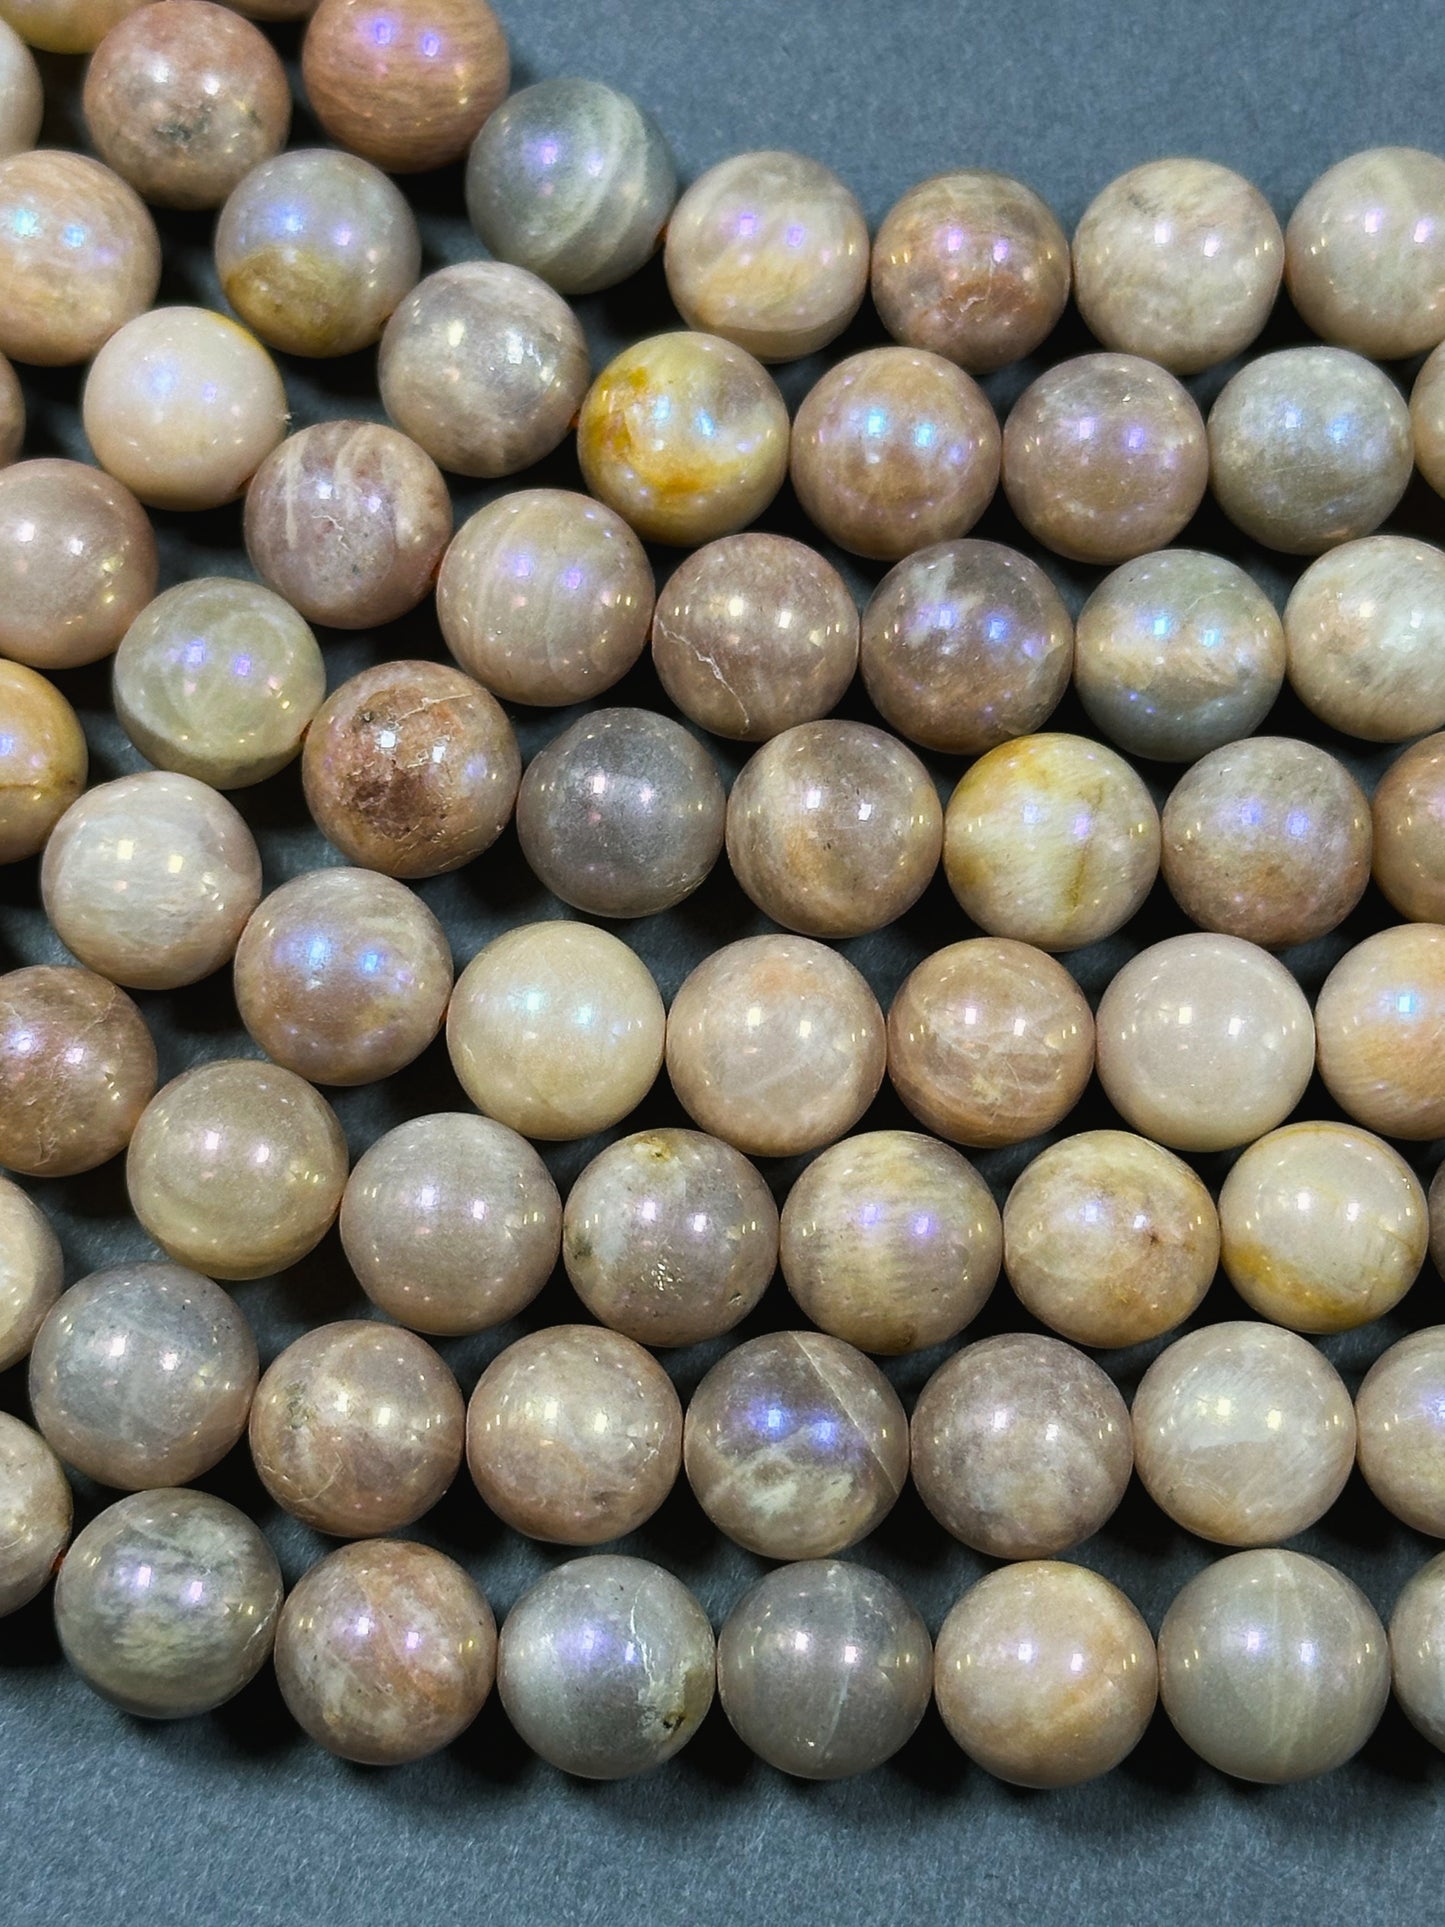 Mystic Natural Sunstone Gemstone Bead 4mm 6mm 8mm 10mm 12mm Round Beads, Beautiful Natural Peach Brown Color Sunstone Bead Full Strand 15.5"